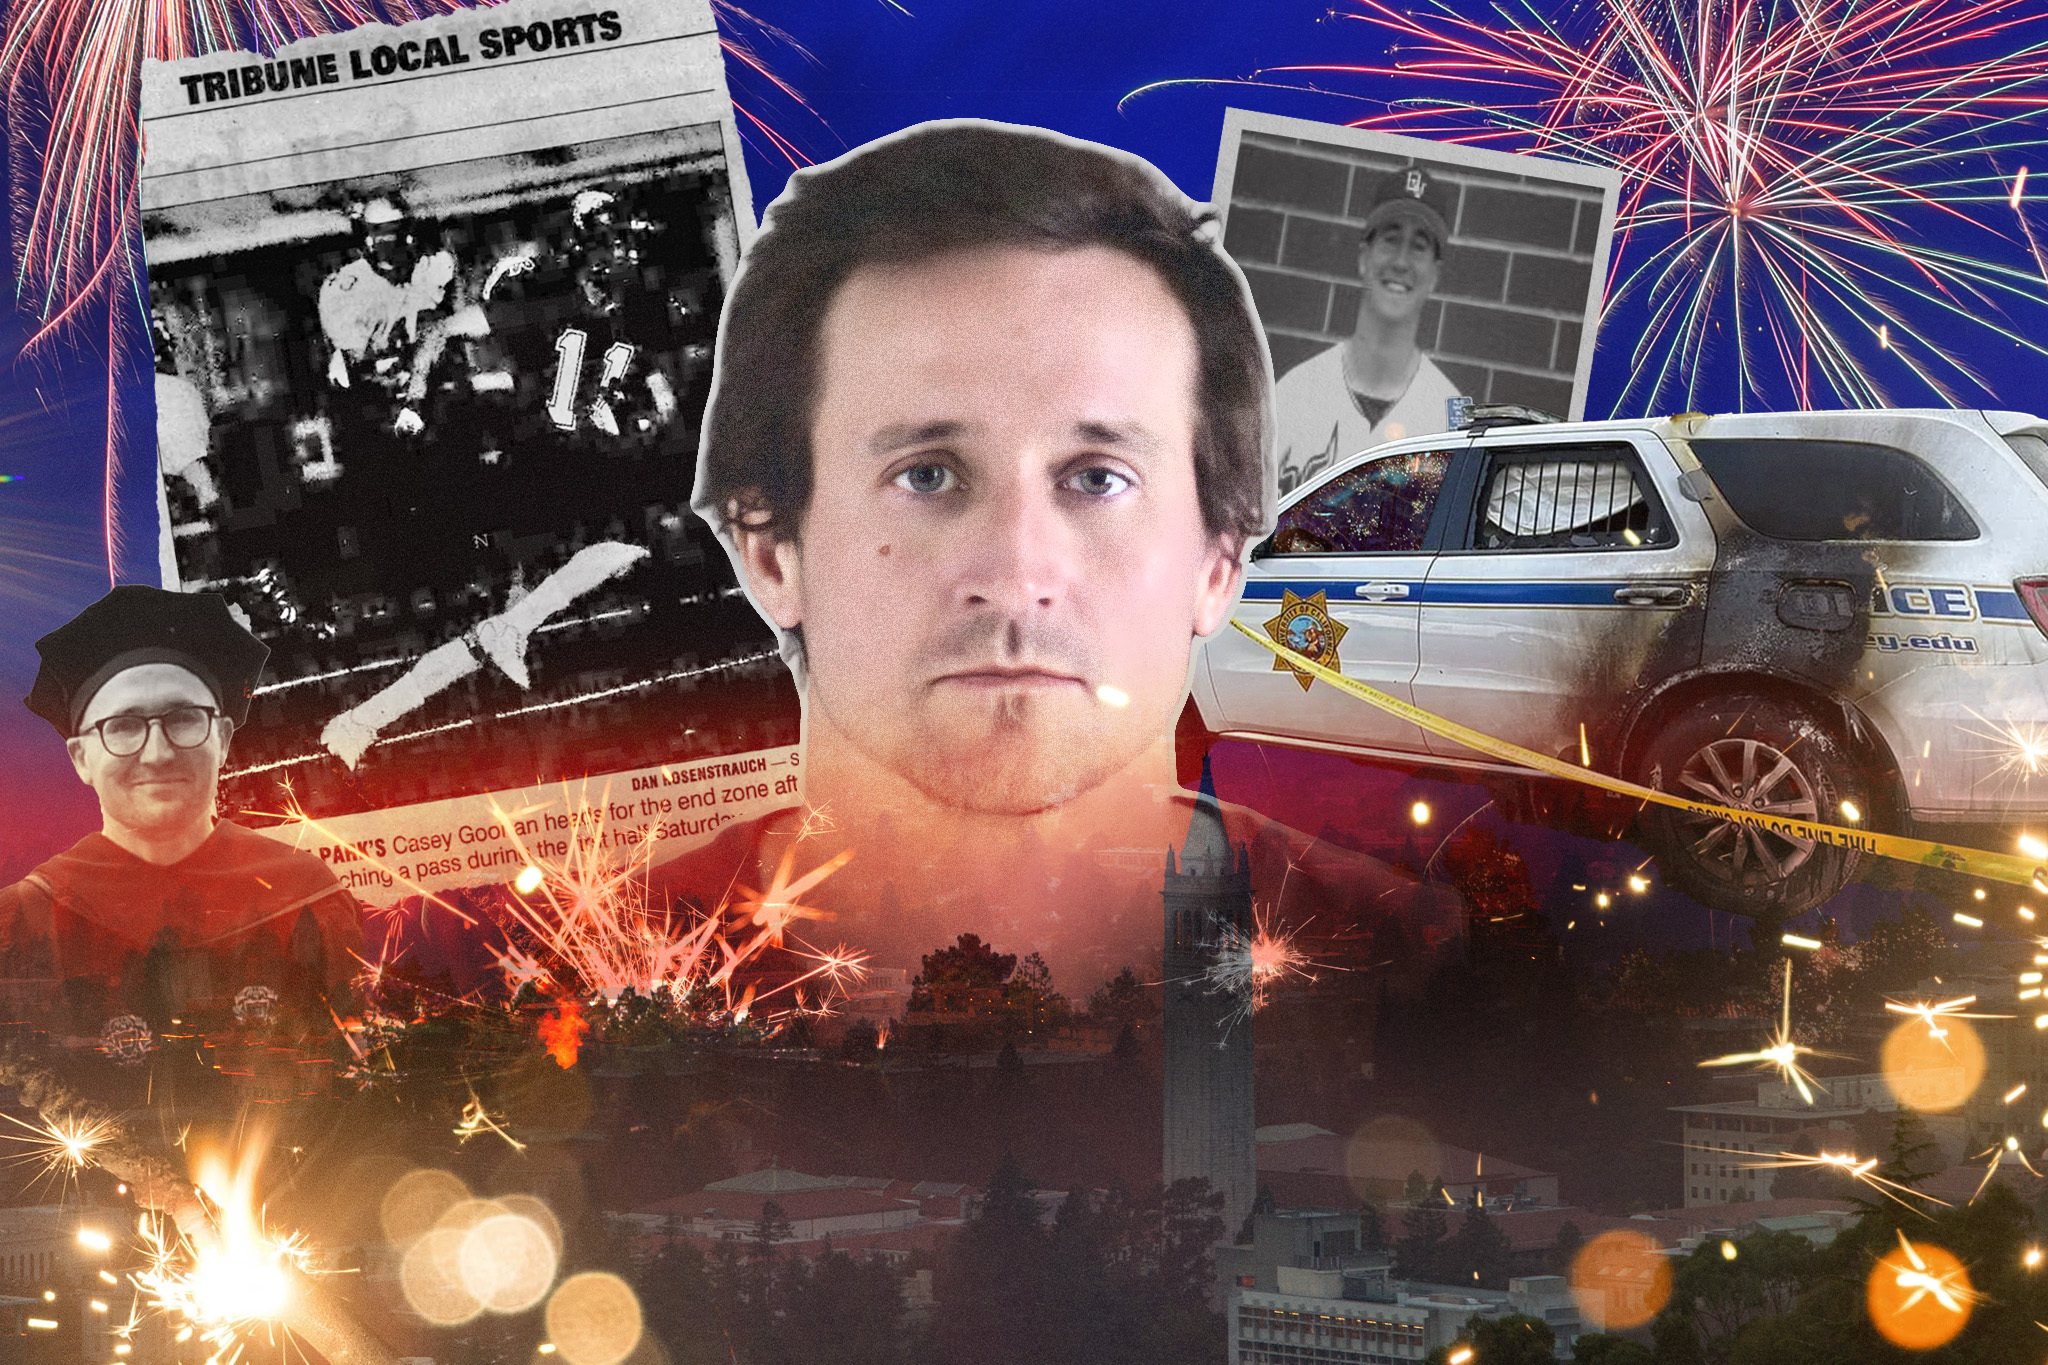 The image features a man's face in the center surrounded by a damaged police car, newspaper clippings, an image of a sports player, fireworks, and a cityscape.